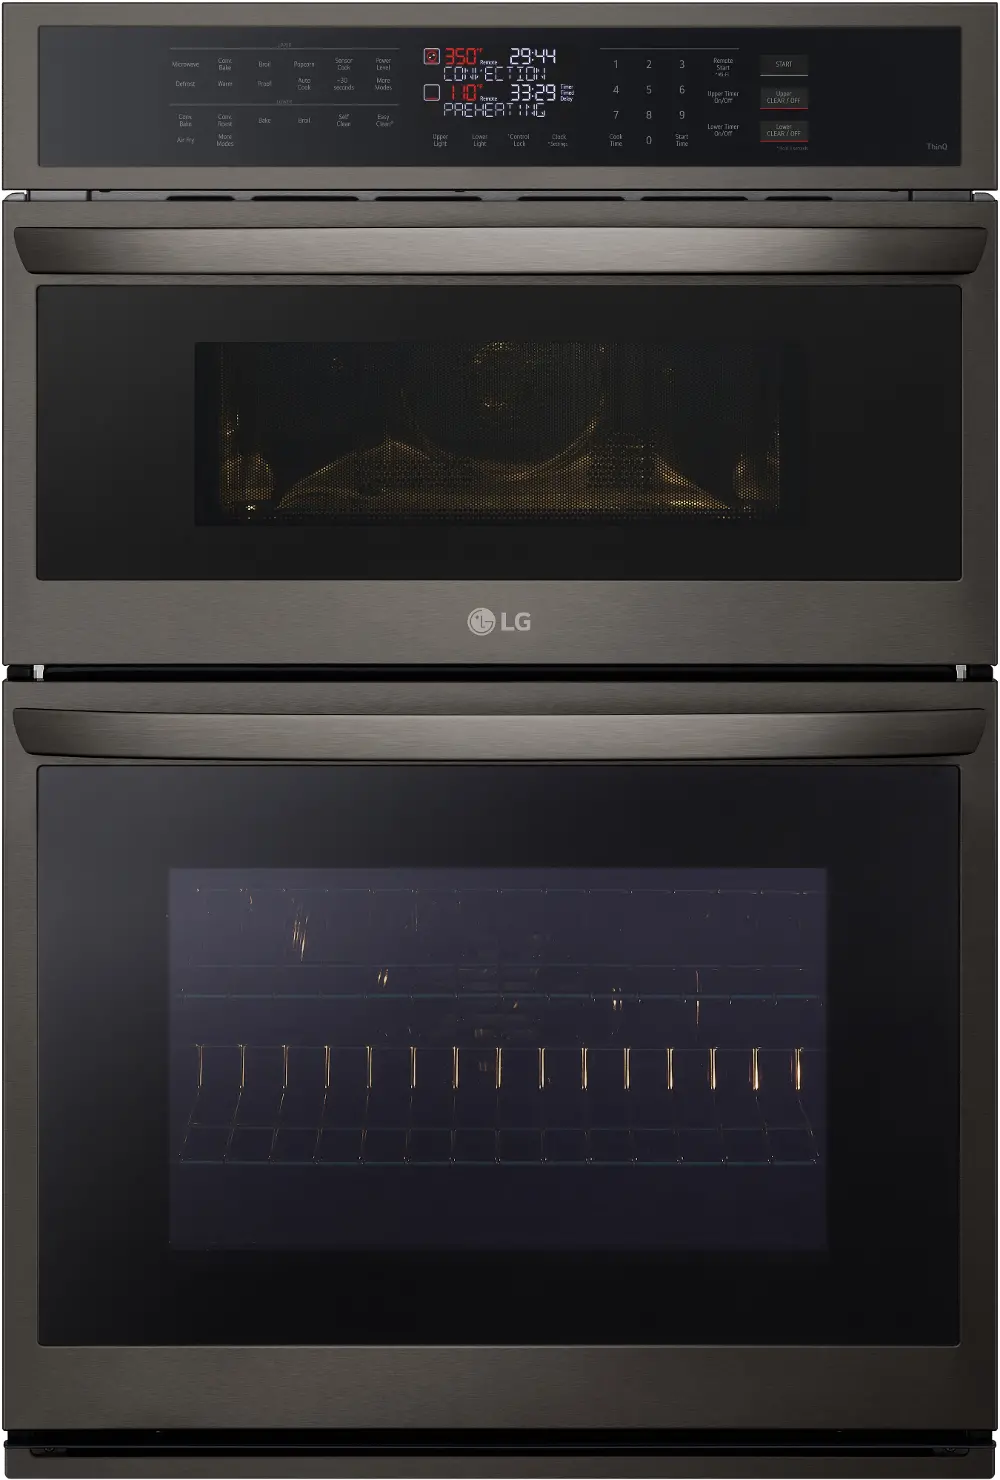 WCEP6423D LG 6.4 cu ft Combination Wall Oven - Black Stainless Steel 30 Inch-1